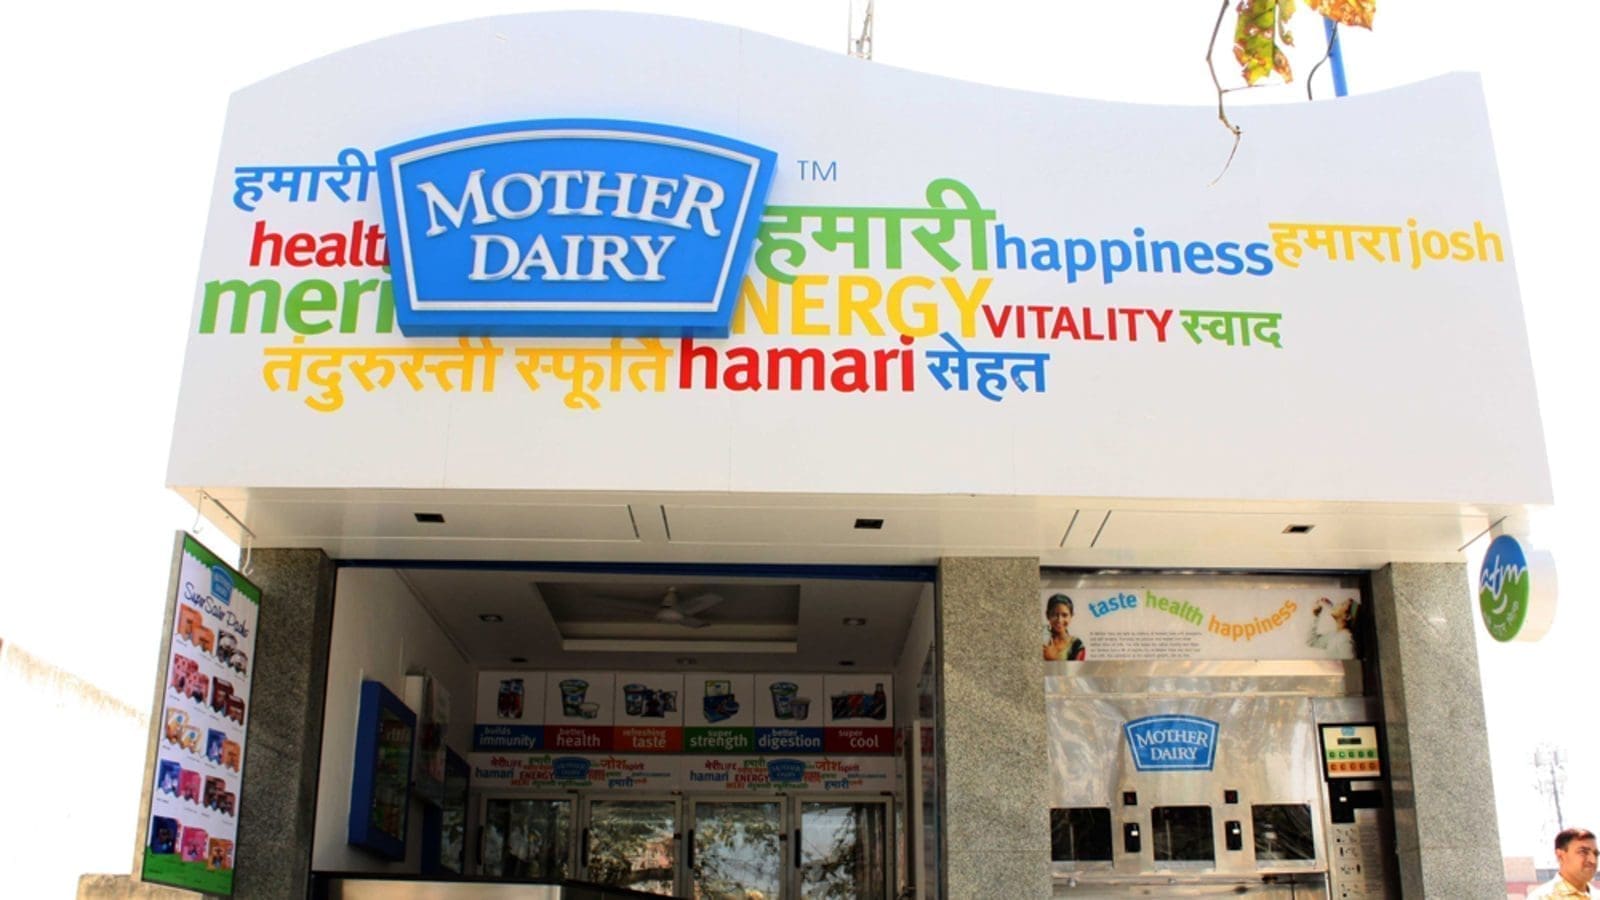 Mother Dairy targets to recycle 7 Billion plastic waste as part of goal to become plastic neutral by 2024